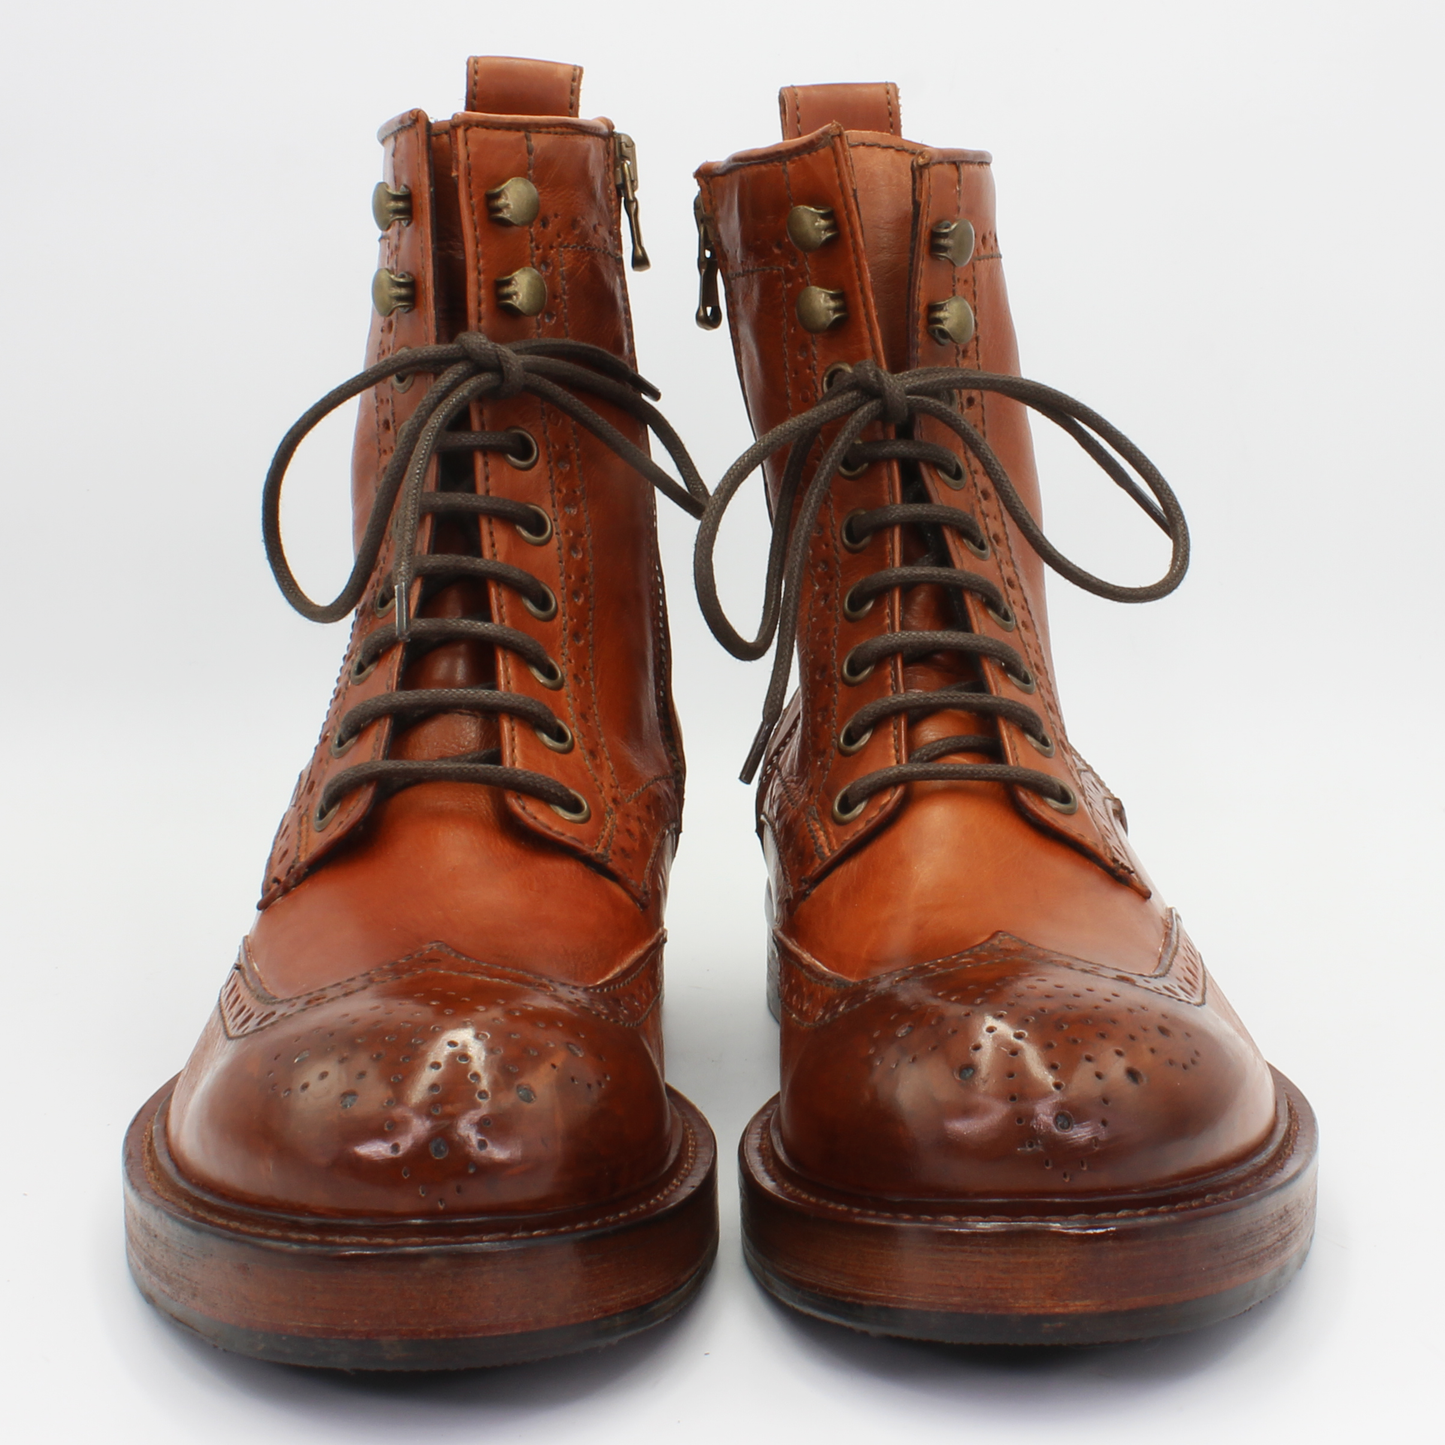 Shop Handmade Italian Leather Brogue Lace-up Ankle Boot in Cuoio Tan (JP35773/39) or browse our range of hand-made Italian boots in leather or suede in-store at Aliverti Cape Town, or shop online. We deliver in South Africa & offer multiple payment plans as well as accept multiple safe & secure payment methods.